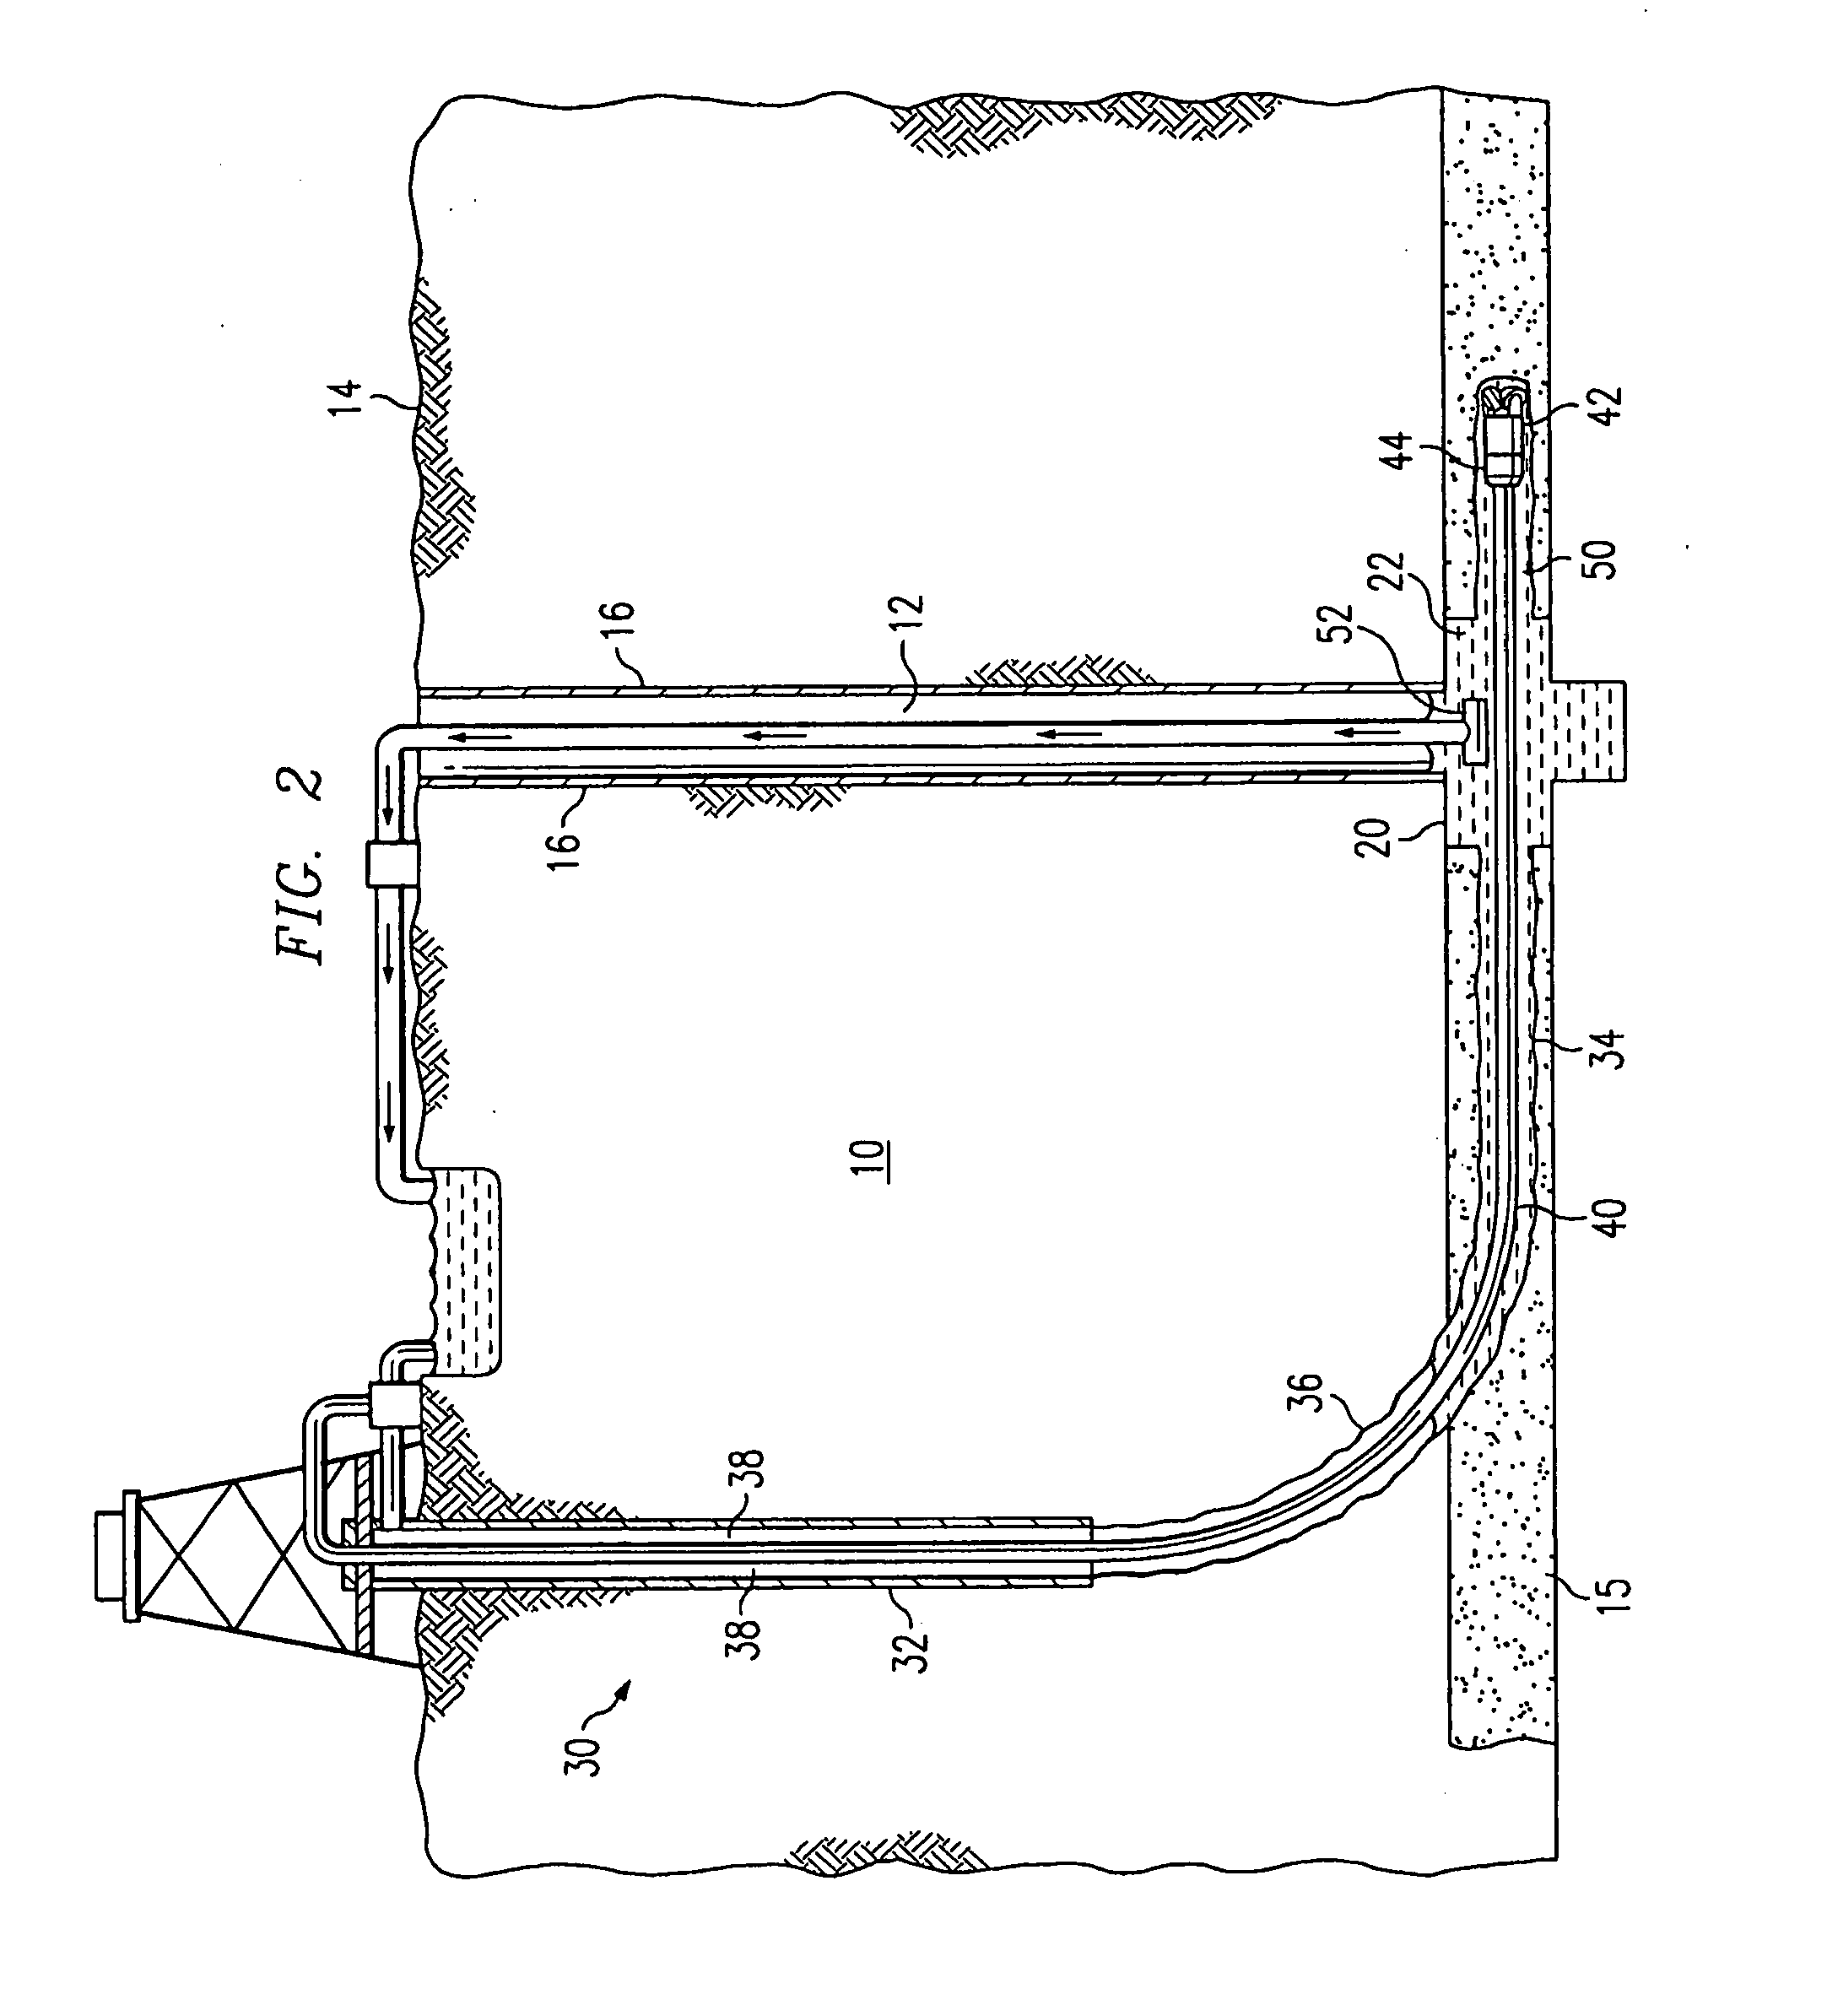 Method and system for accessing subterranean deposits from the surface and tools therefor